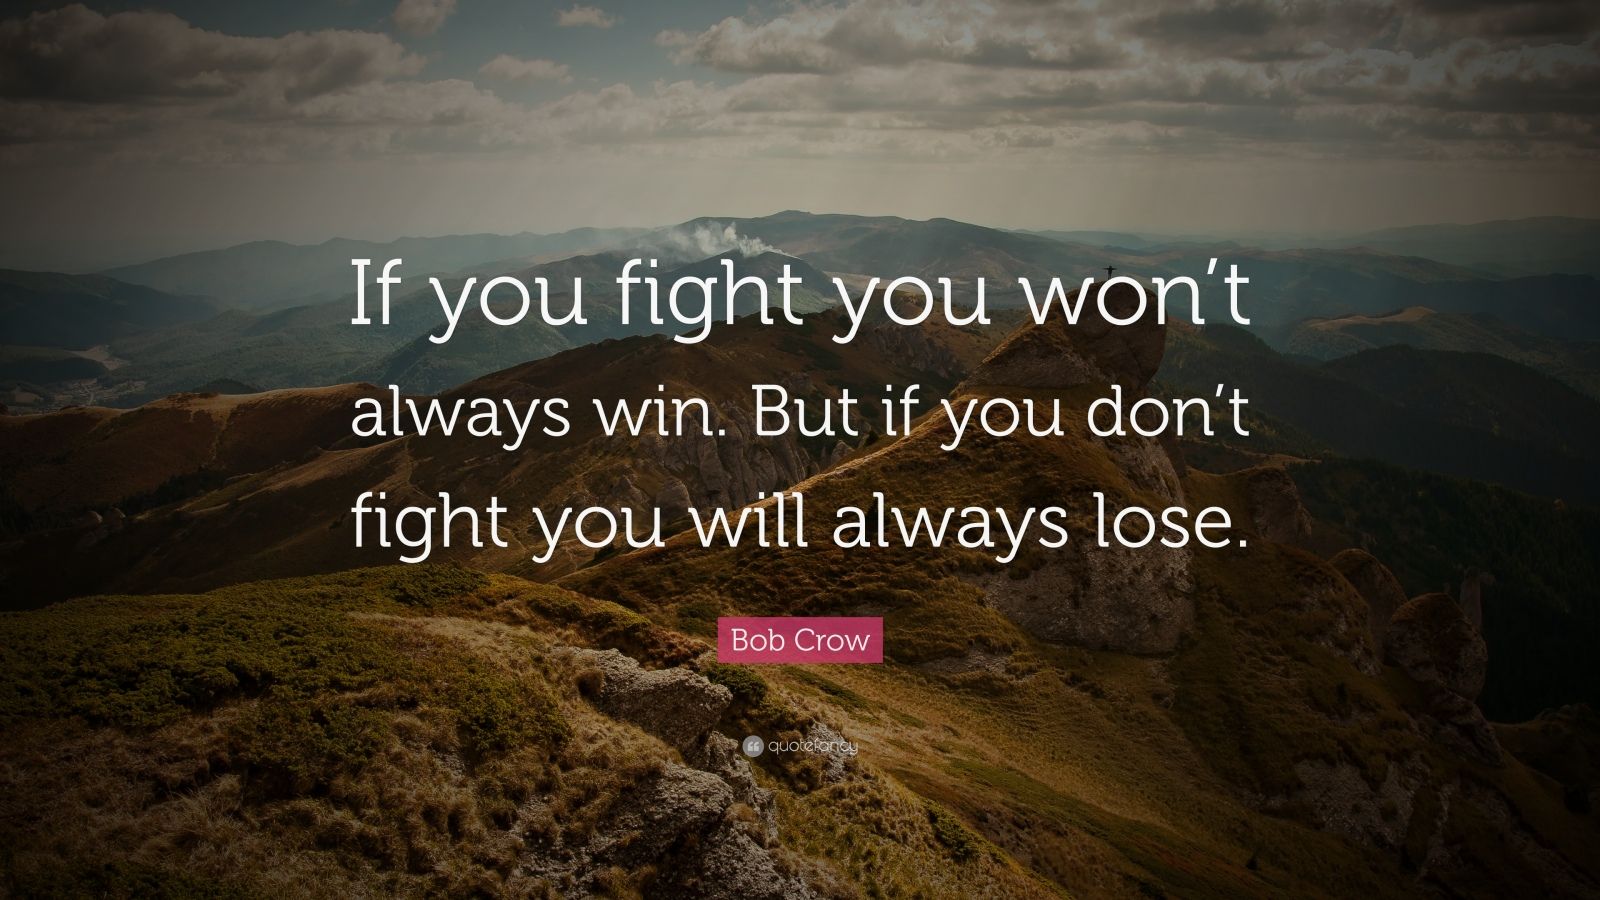 Bob Crow Quote: “If you fight you won’t always win. But if you don’t